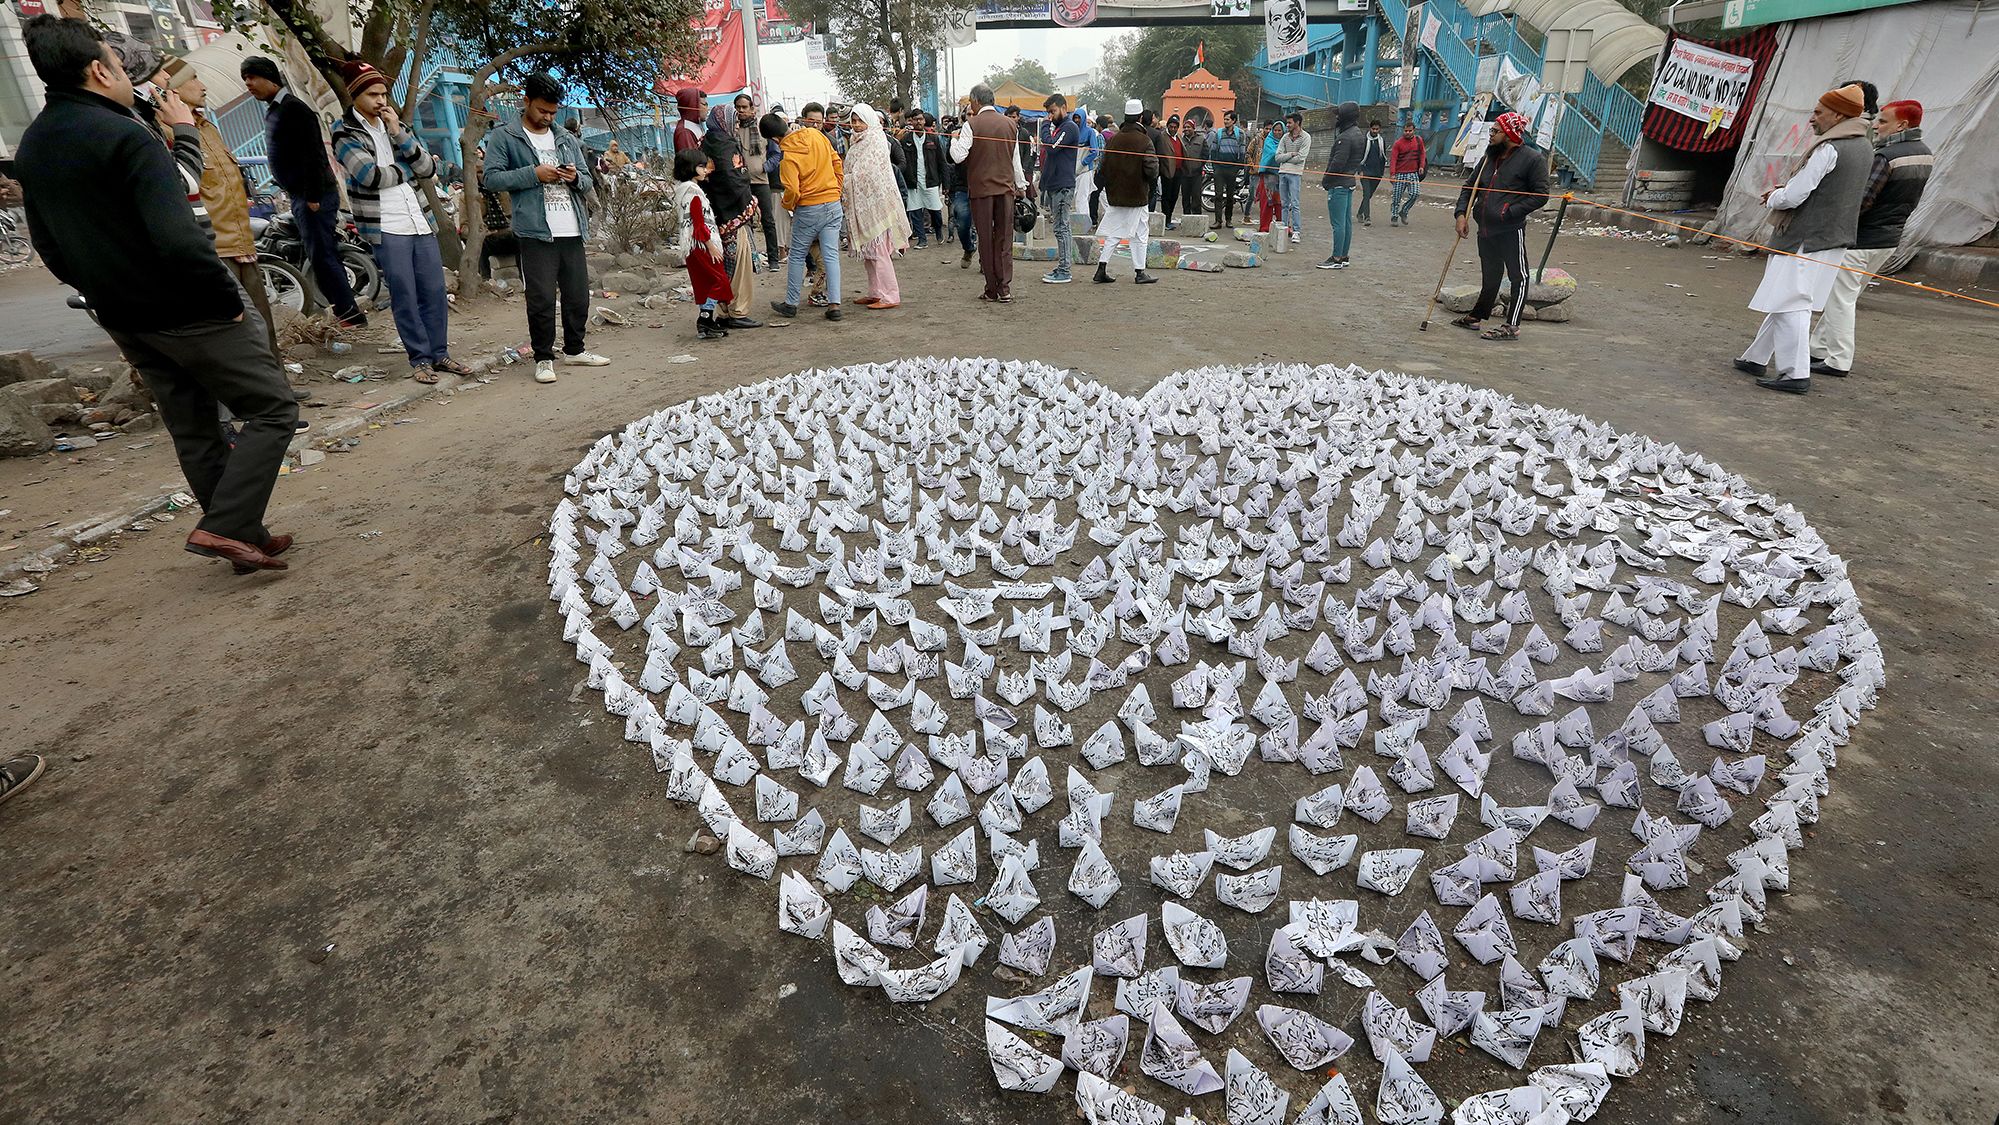 A heart made of paper boats with slogans on them rests near a protest in the Shaheen Bagh neighborhood in New Delhi on Wednesday, January 16.